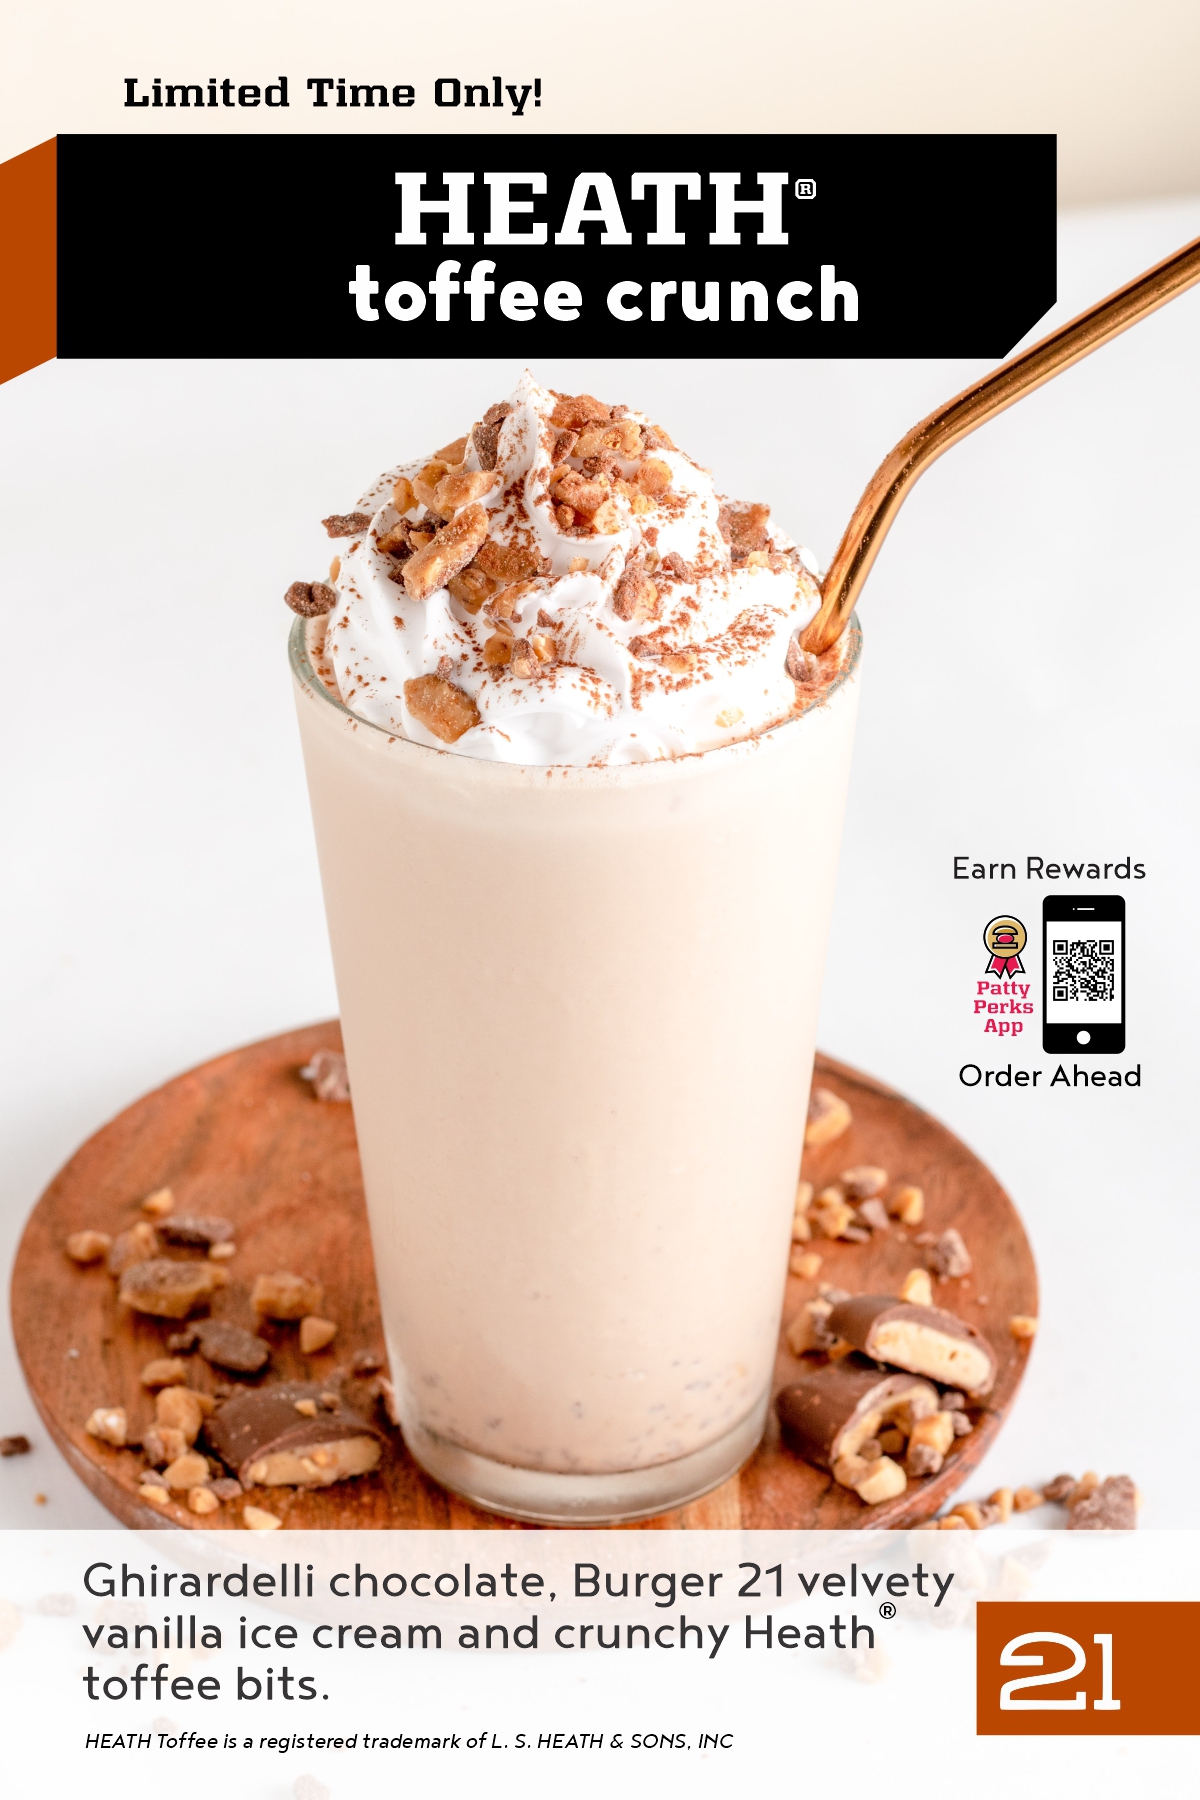 The Heath® Toffee Crunch Shake Arrives Sept. 26th